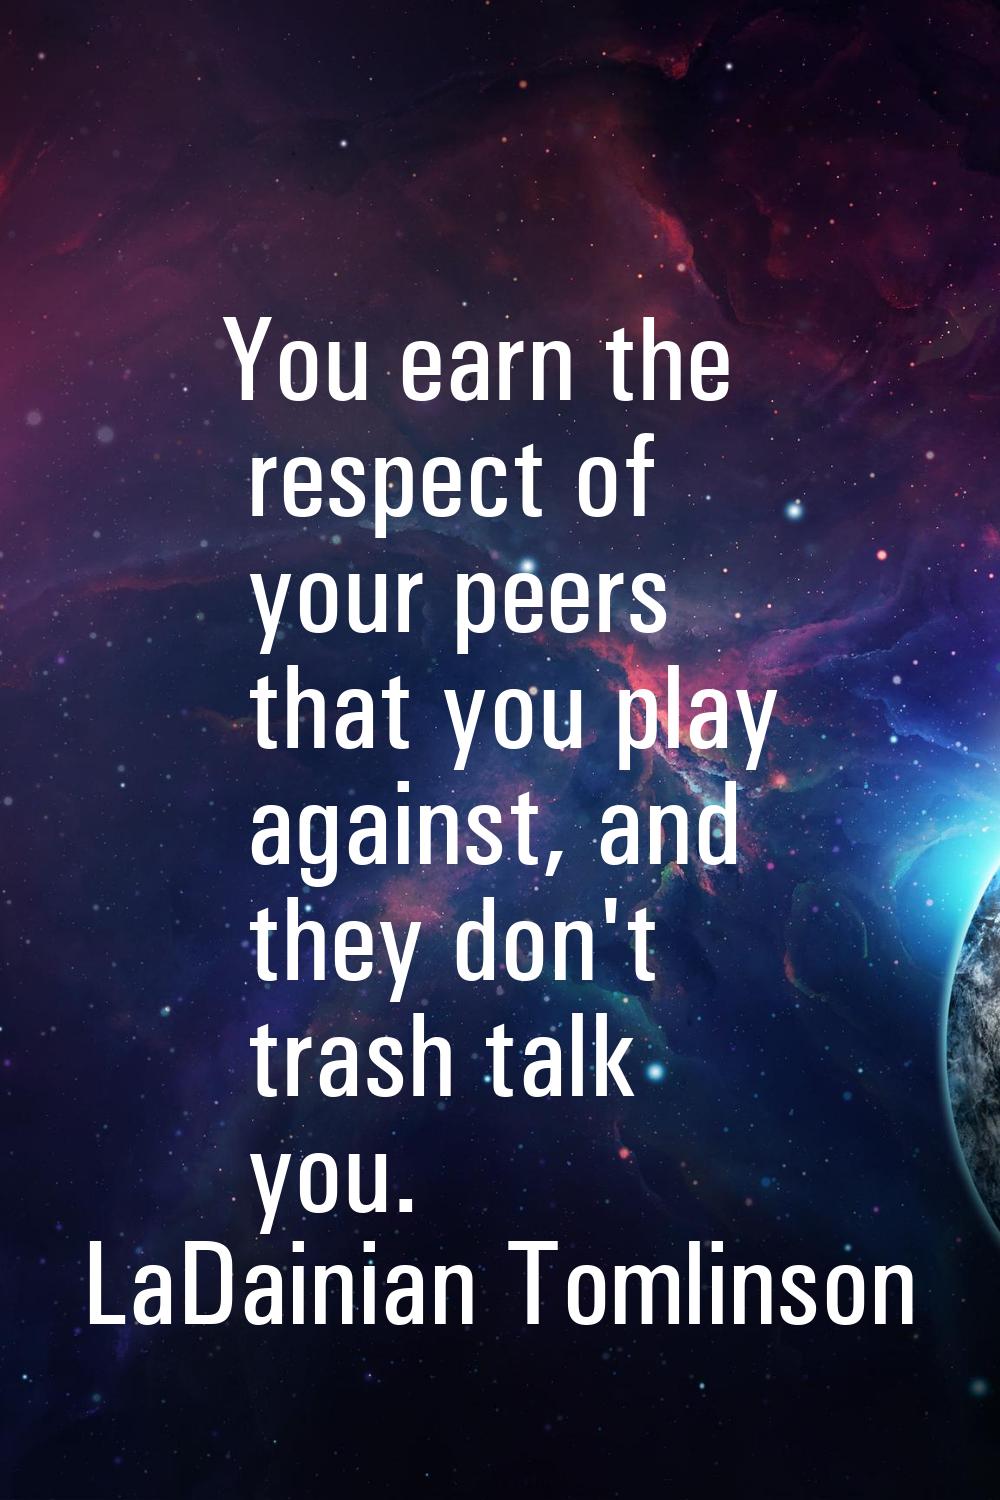 You earn the respect of your peers that you play against, and they don't trash talk you.